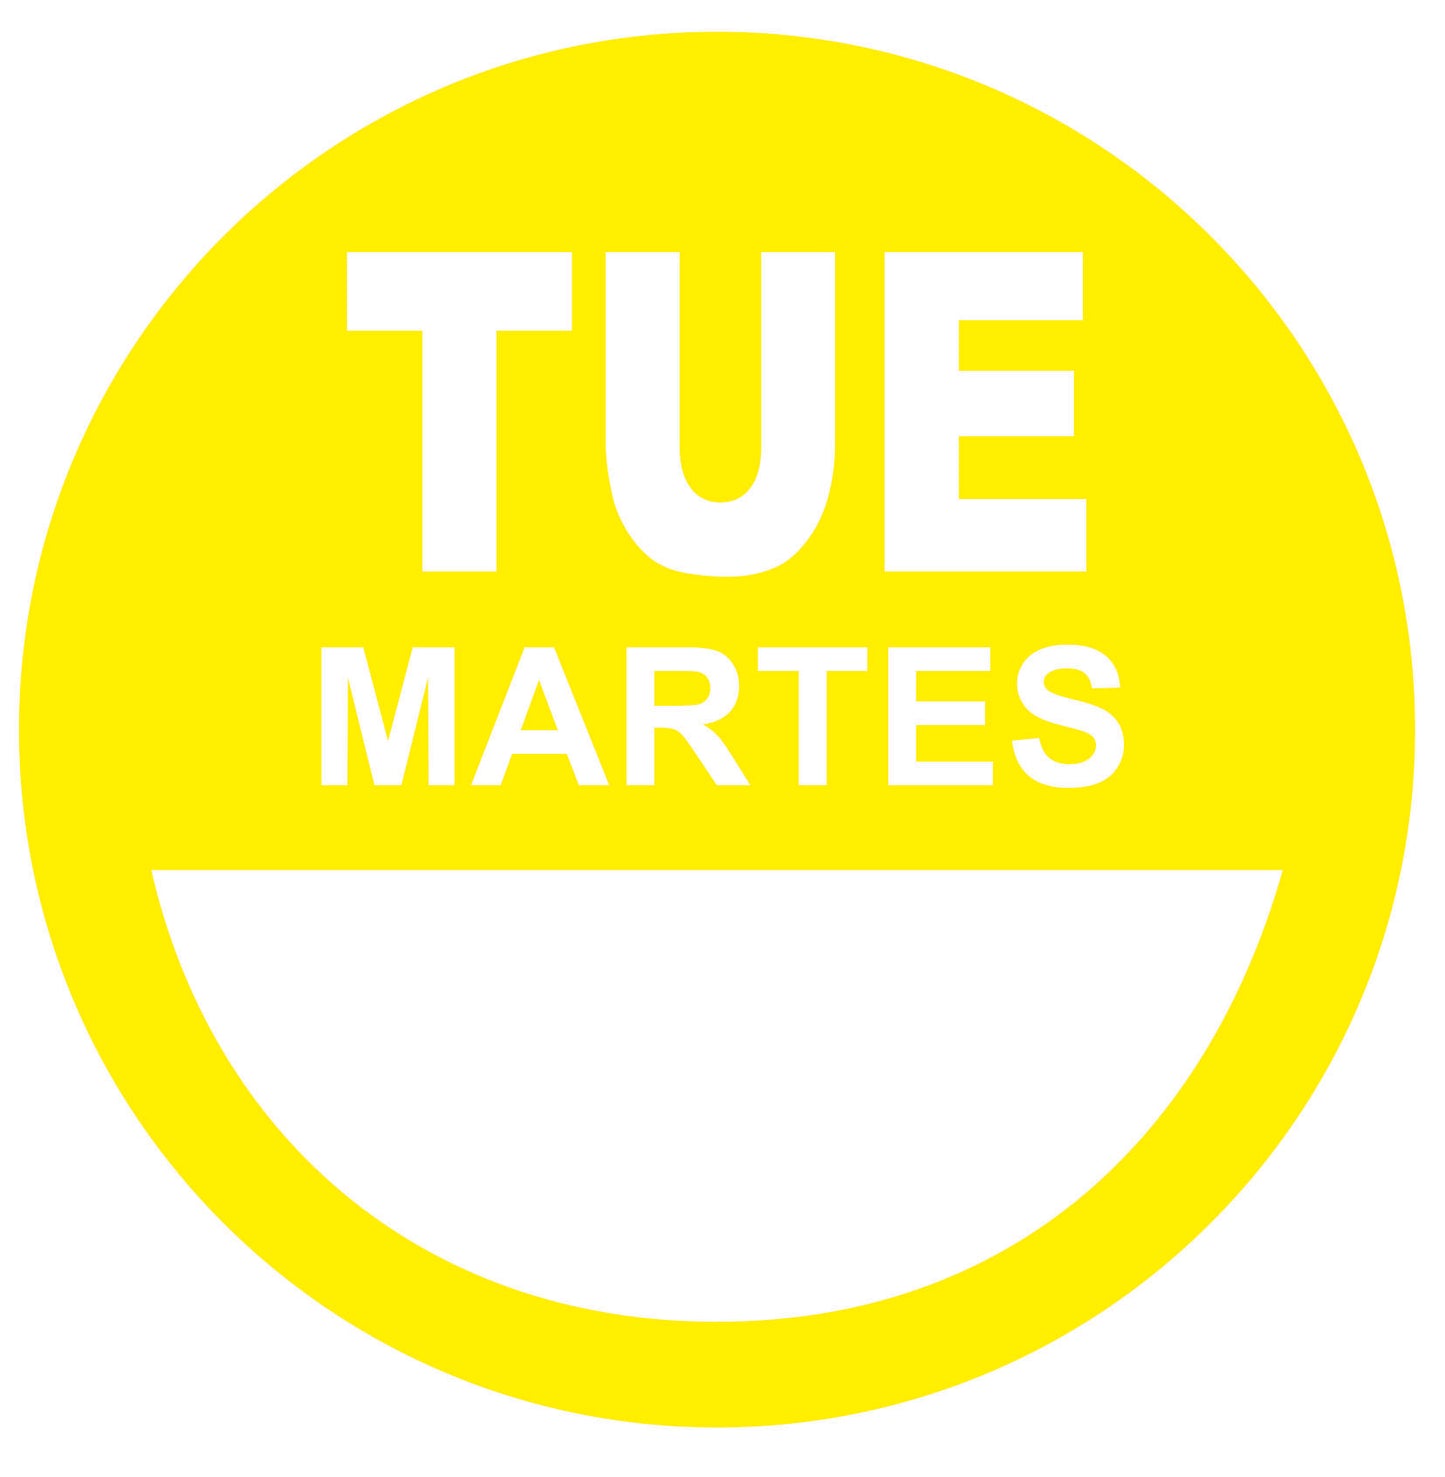 Tuesday-Martes 2" Cold Temperature Day of the Week Date Label